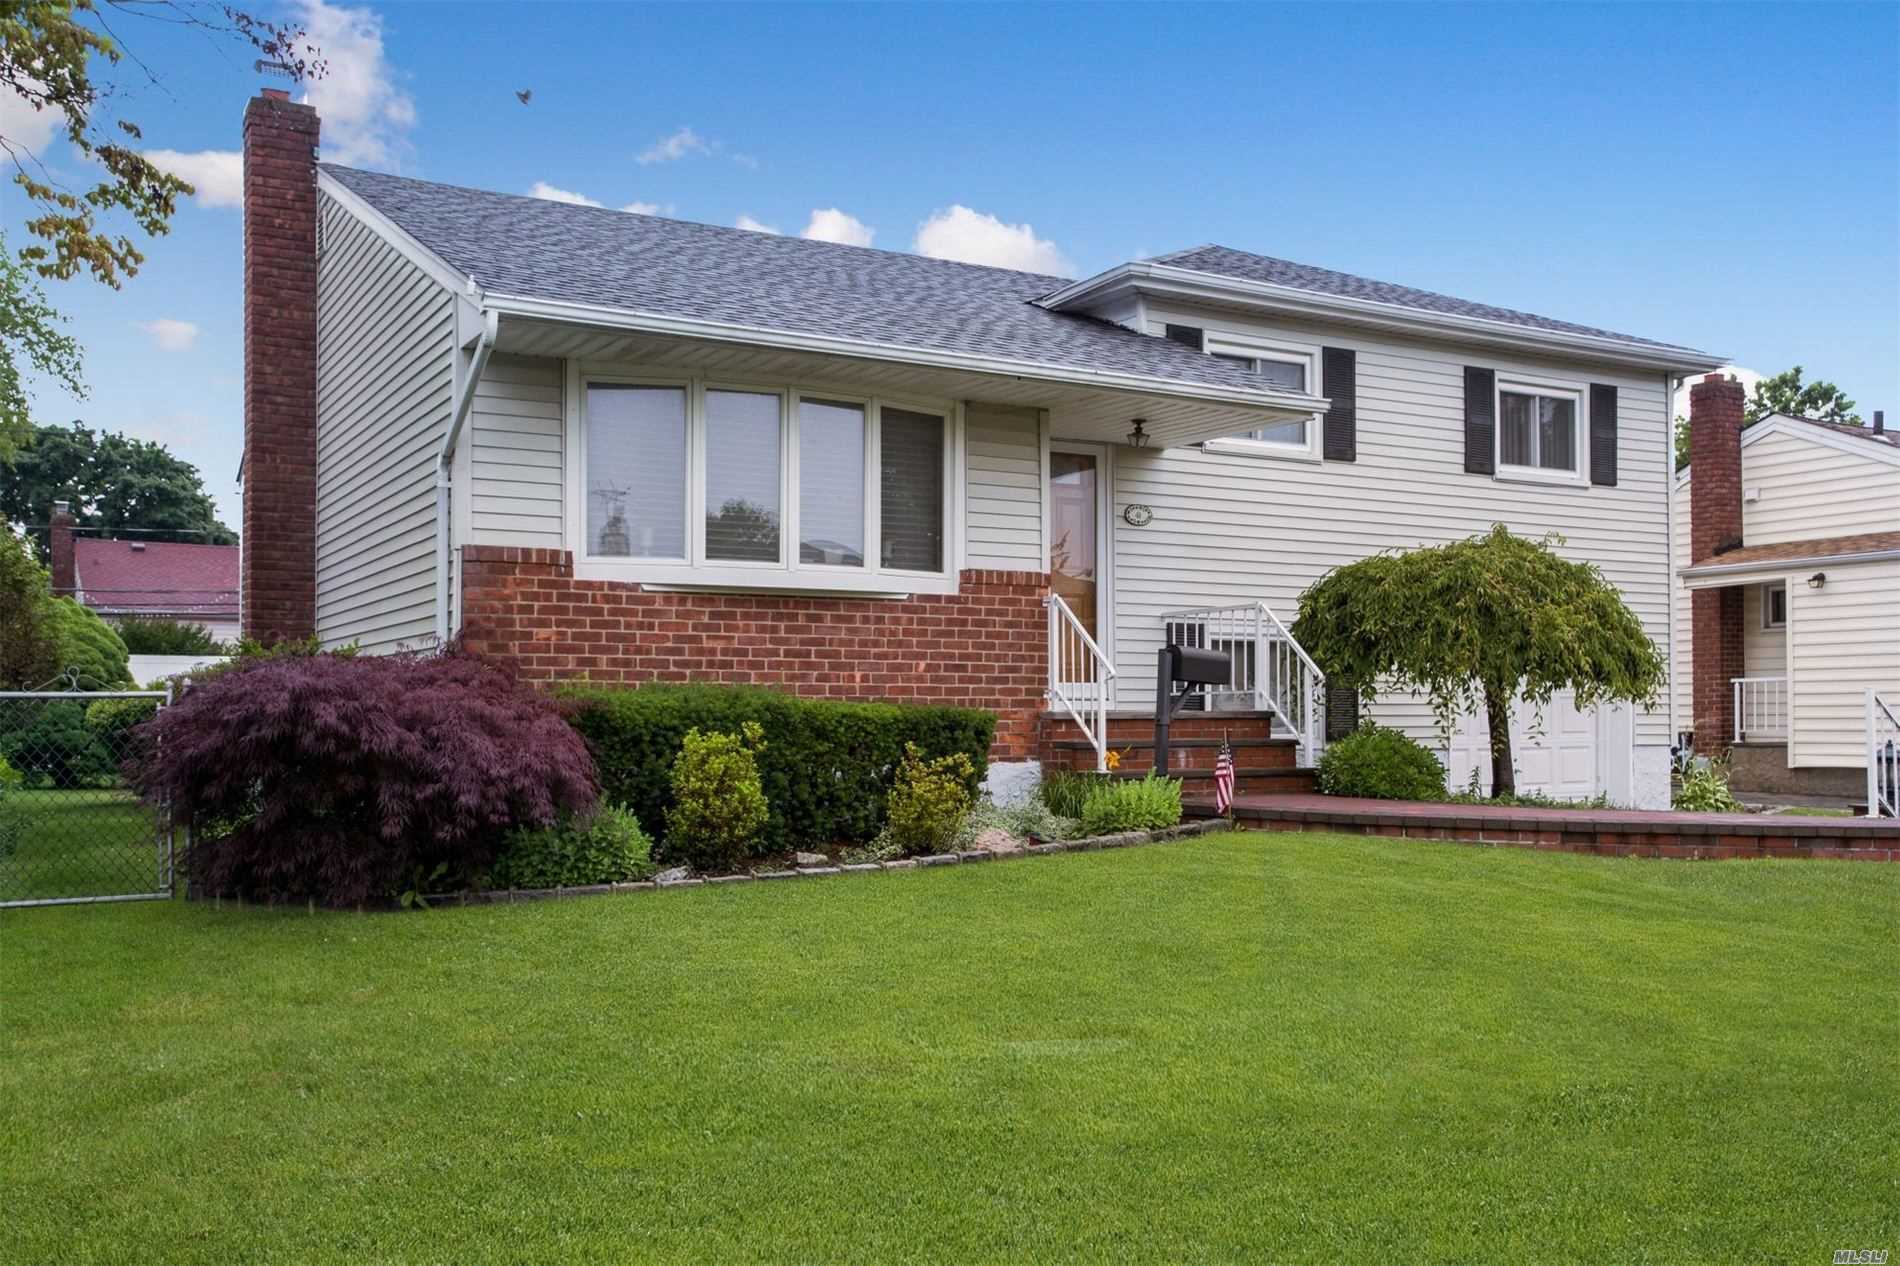 Welcome to 41 Cambridge Drive Hicksville, A beautiful mid block split level home with great curb appeal , professionally landscaped . Featuring 3/4 Bedrooms 1.5 bathrooms, hard wood floors, gas heat and gas cooking, updated roof, windows, siding, bathrooms and kitchen. Hurry, this one won&rsquo;t last.